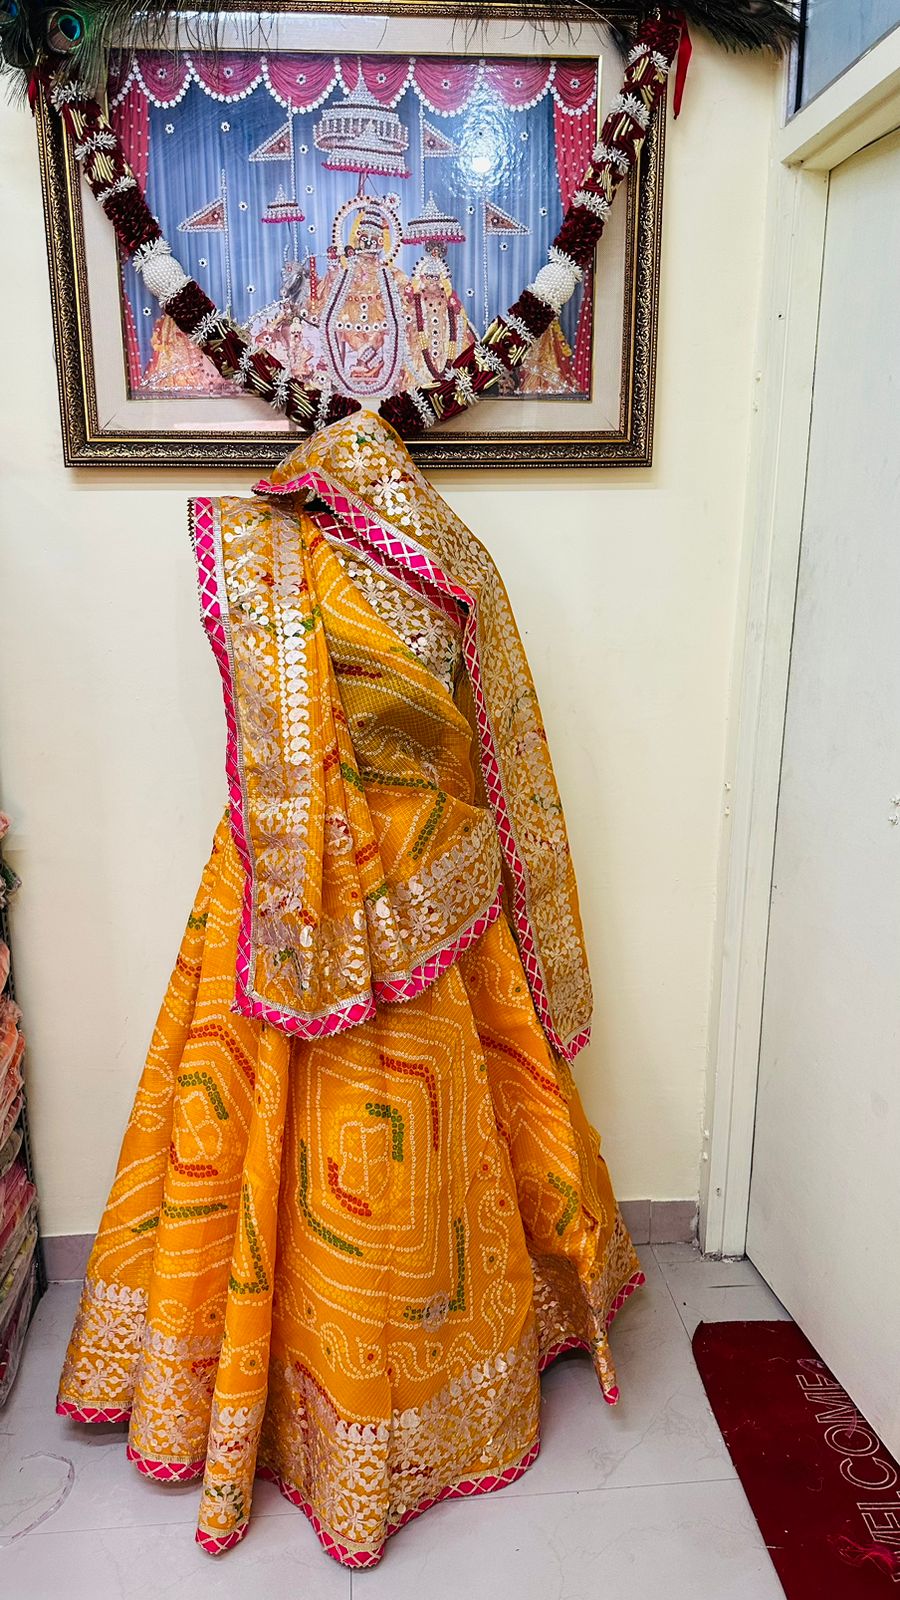 How To Rock A Bandhani Lehenga For Different Occasions - KALKI Fashion Blog